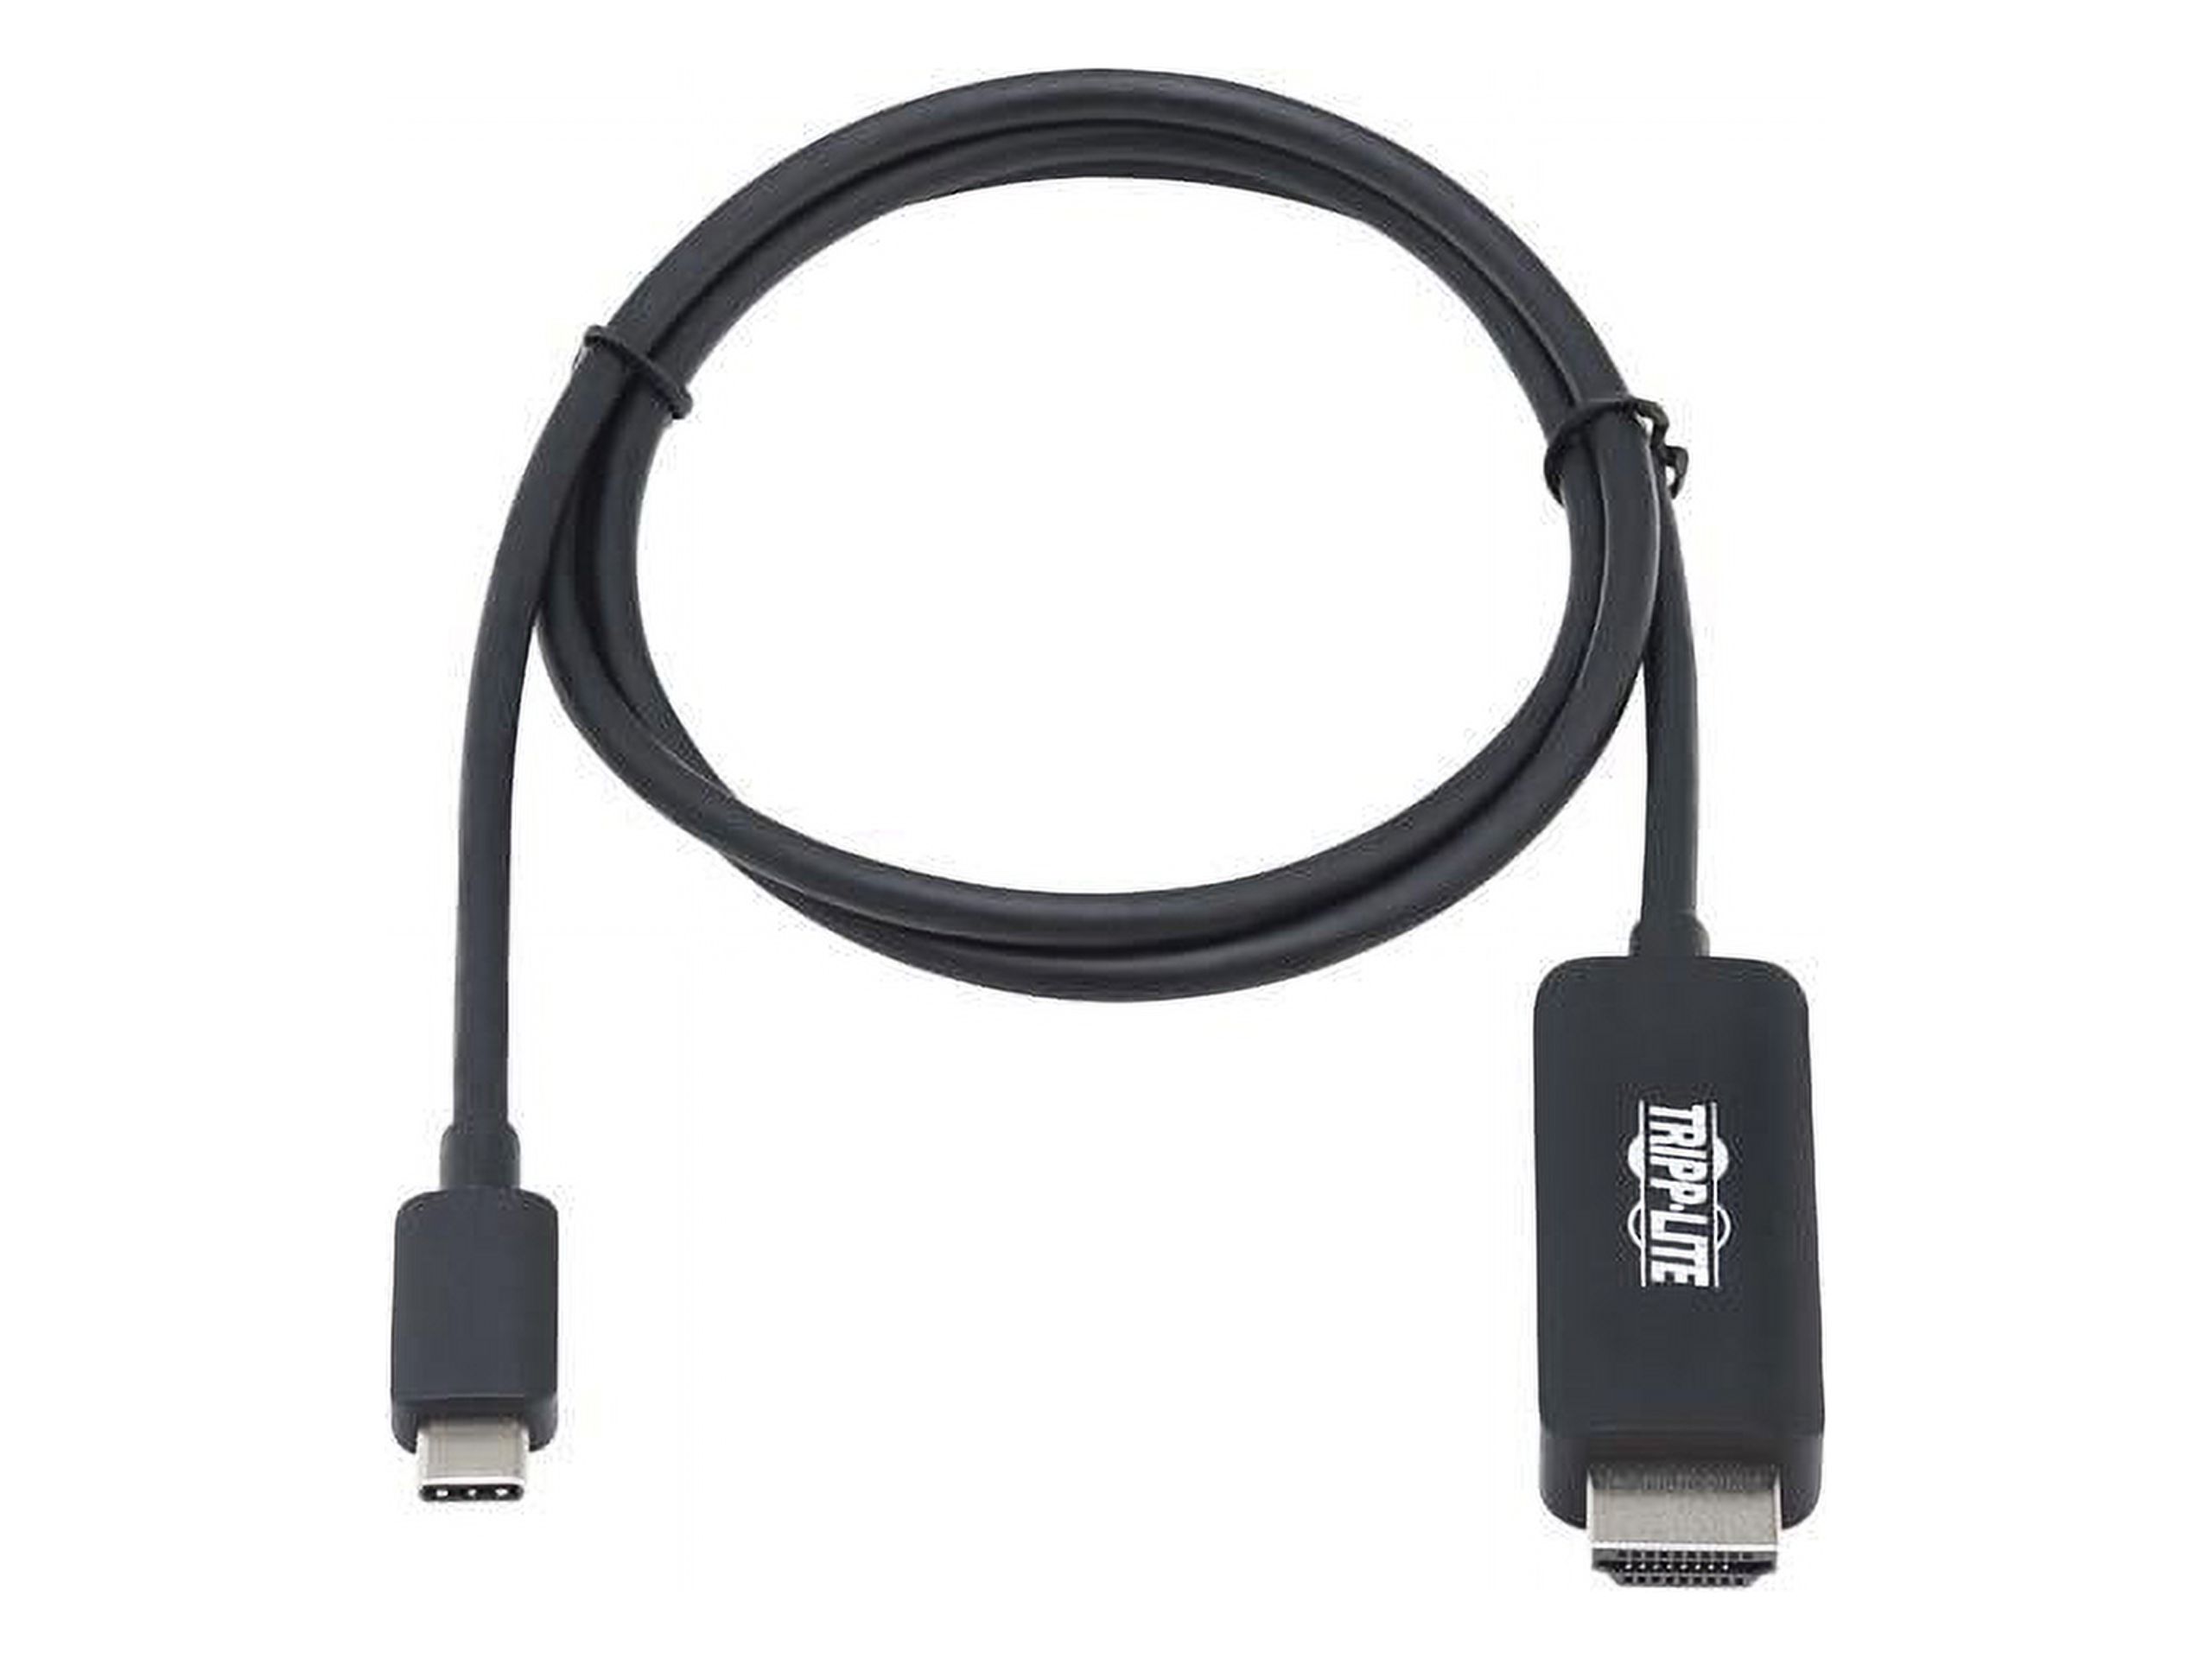 Tripp Lite U444-003-HBE USB-C to HDMI Adapter Cable (M/M), 4K, 4:4:4, Thunderbolt 3 Compatible, Black, 3 ft. - image 1 of 5